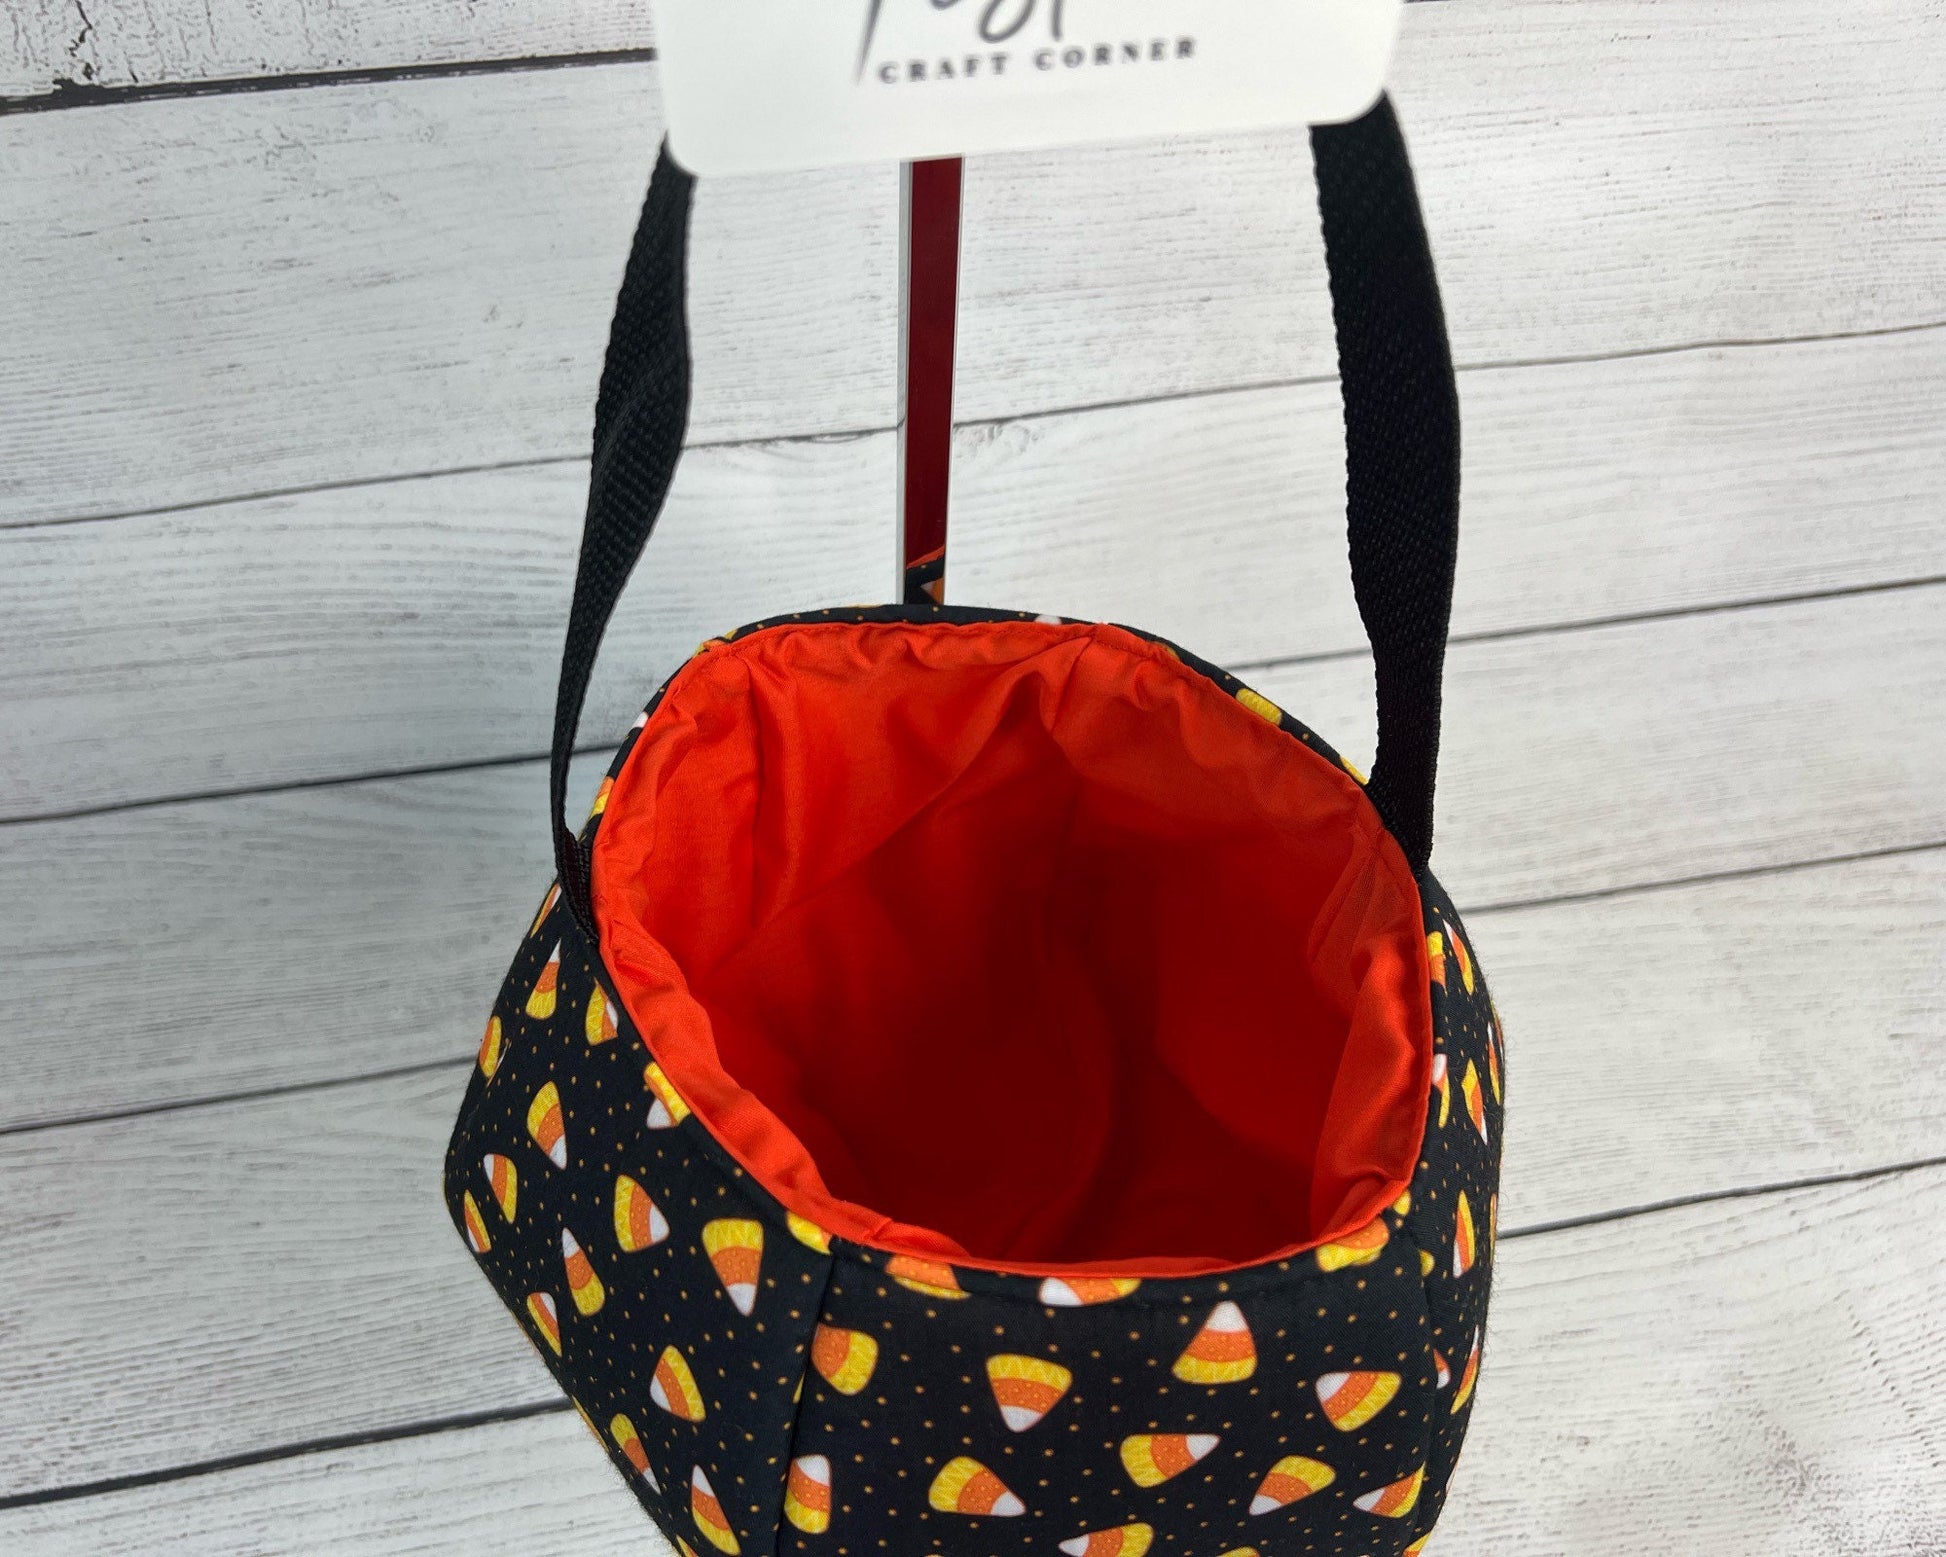 Classic Candy Corn Tote Bag - Bag - Tote - Orange - Candy - Orange Ombré - Sweet - Everyday - Holiday - Easter - Halloween - Party - Gift